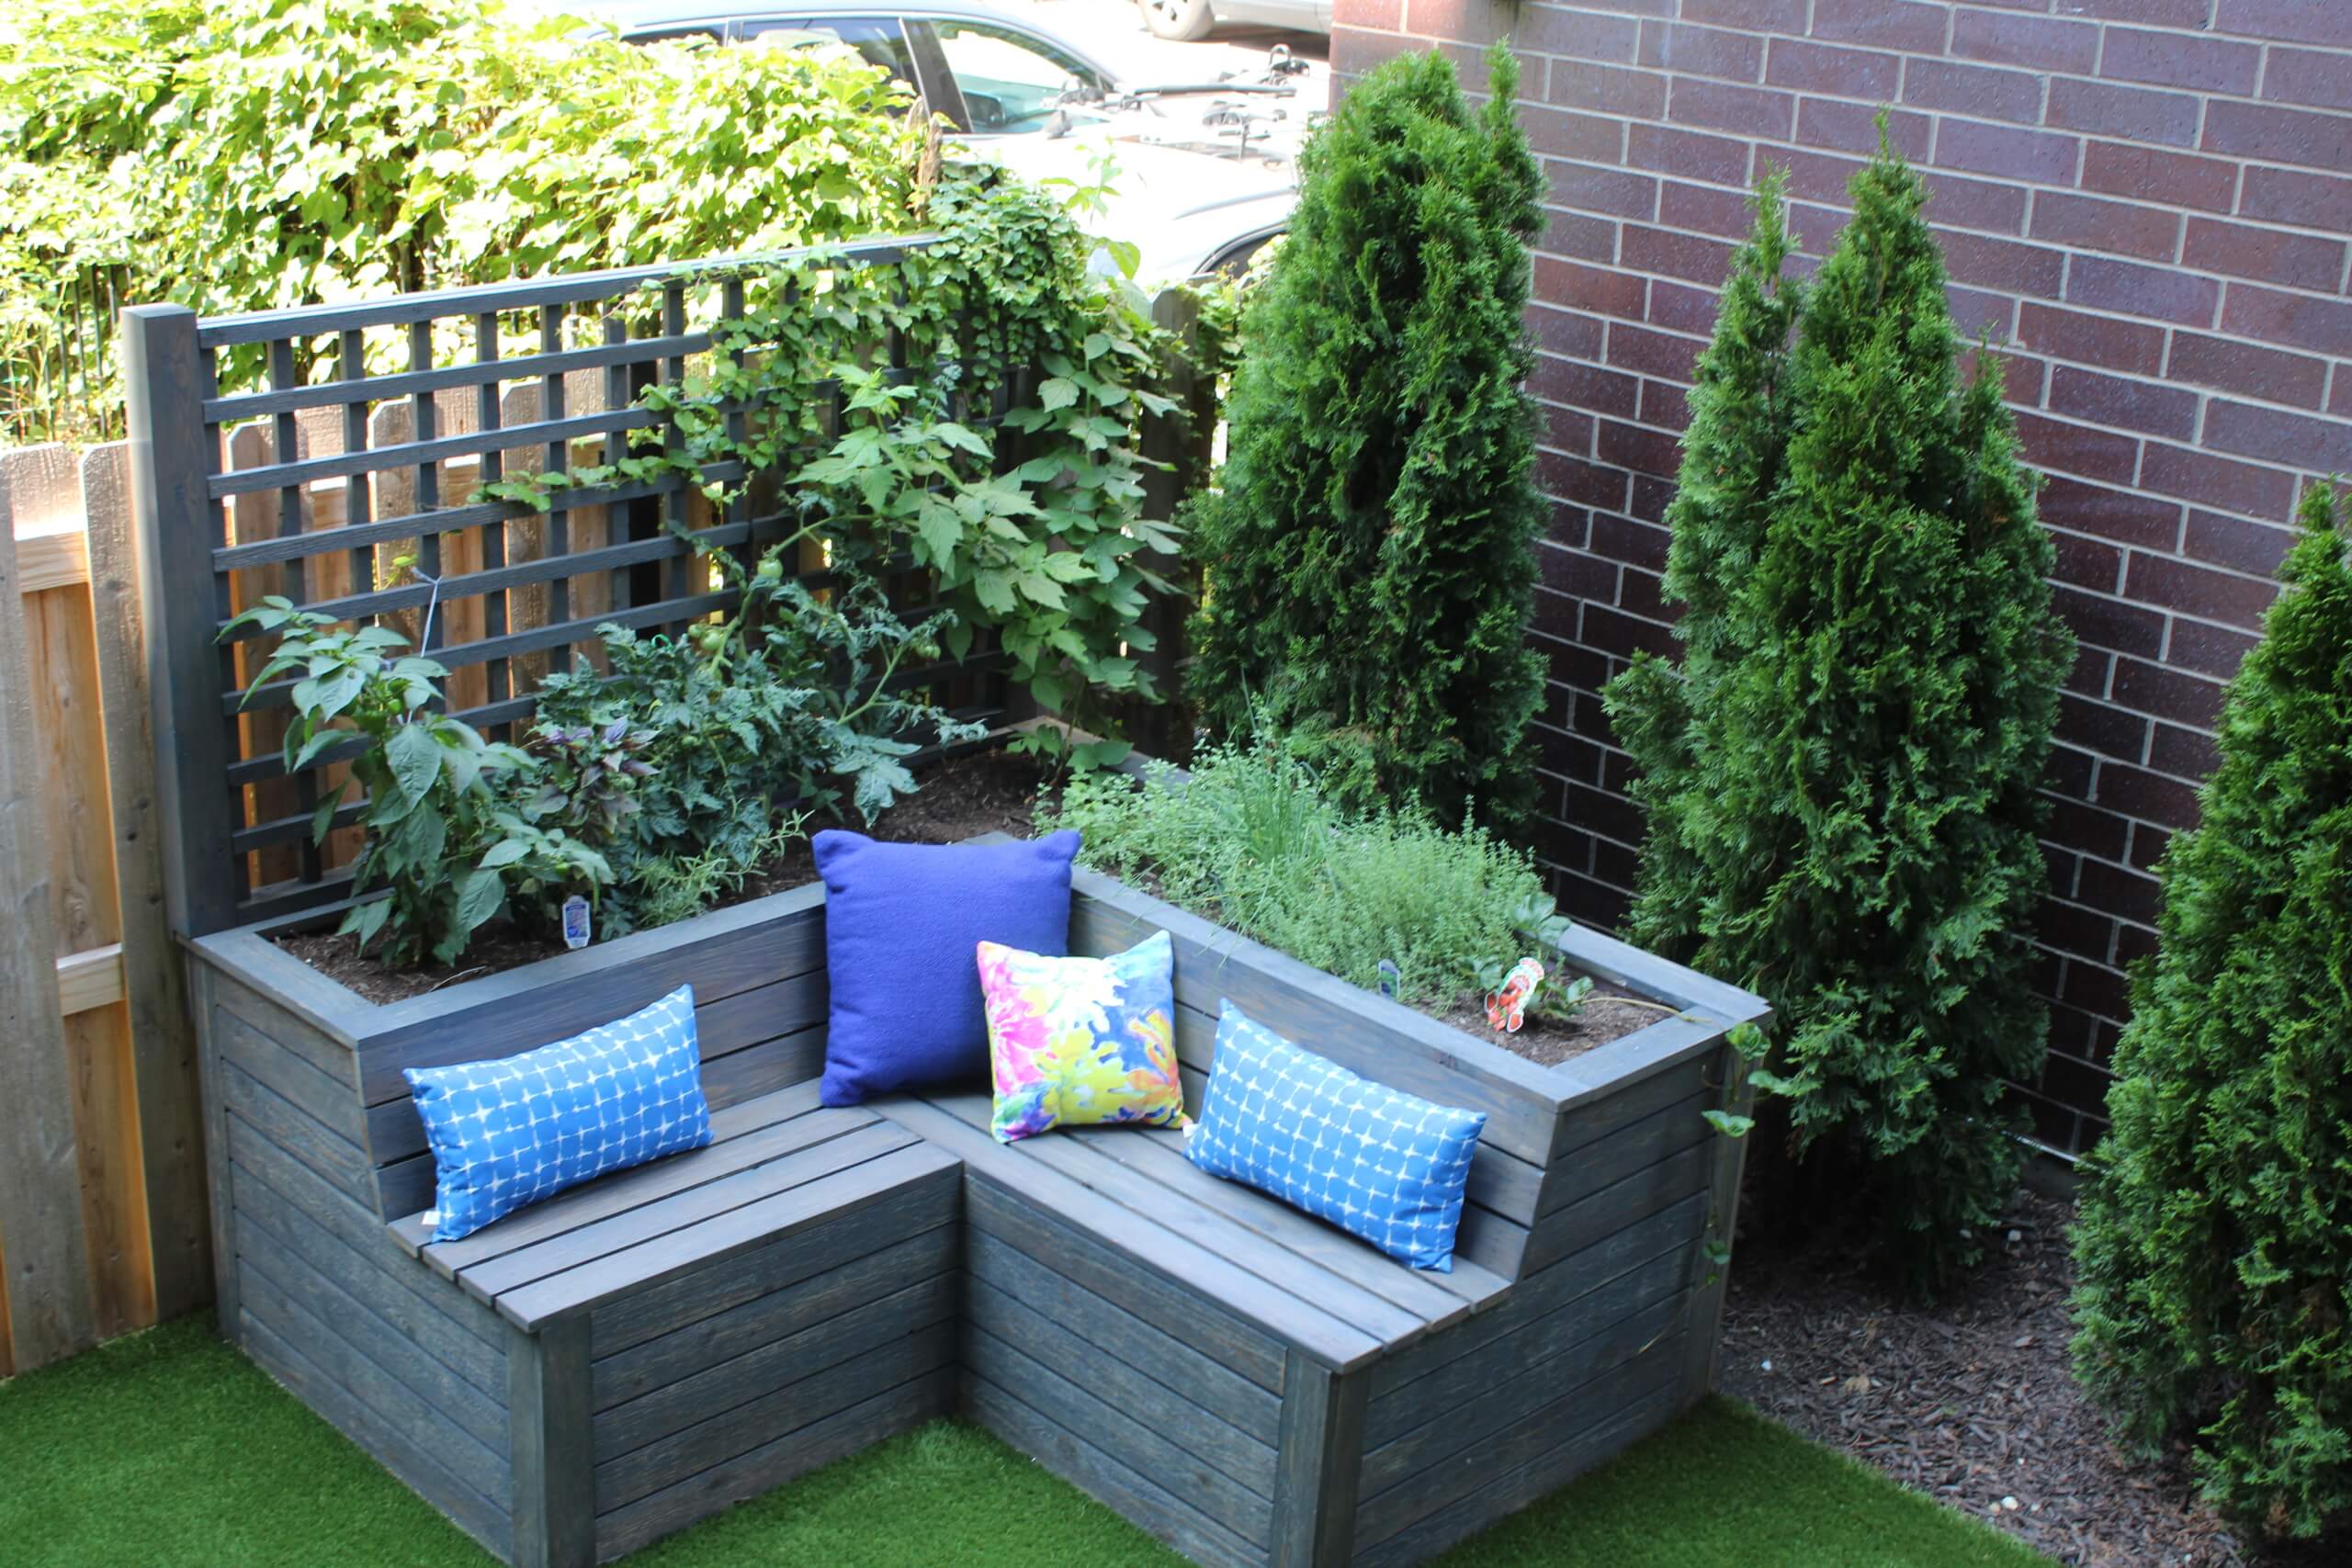 Custom Furniture With Built-In Planters Lakeview Chicago il